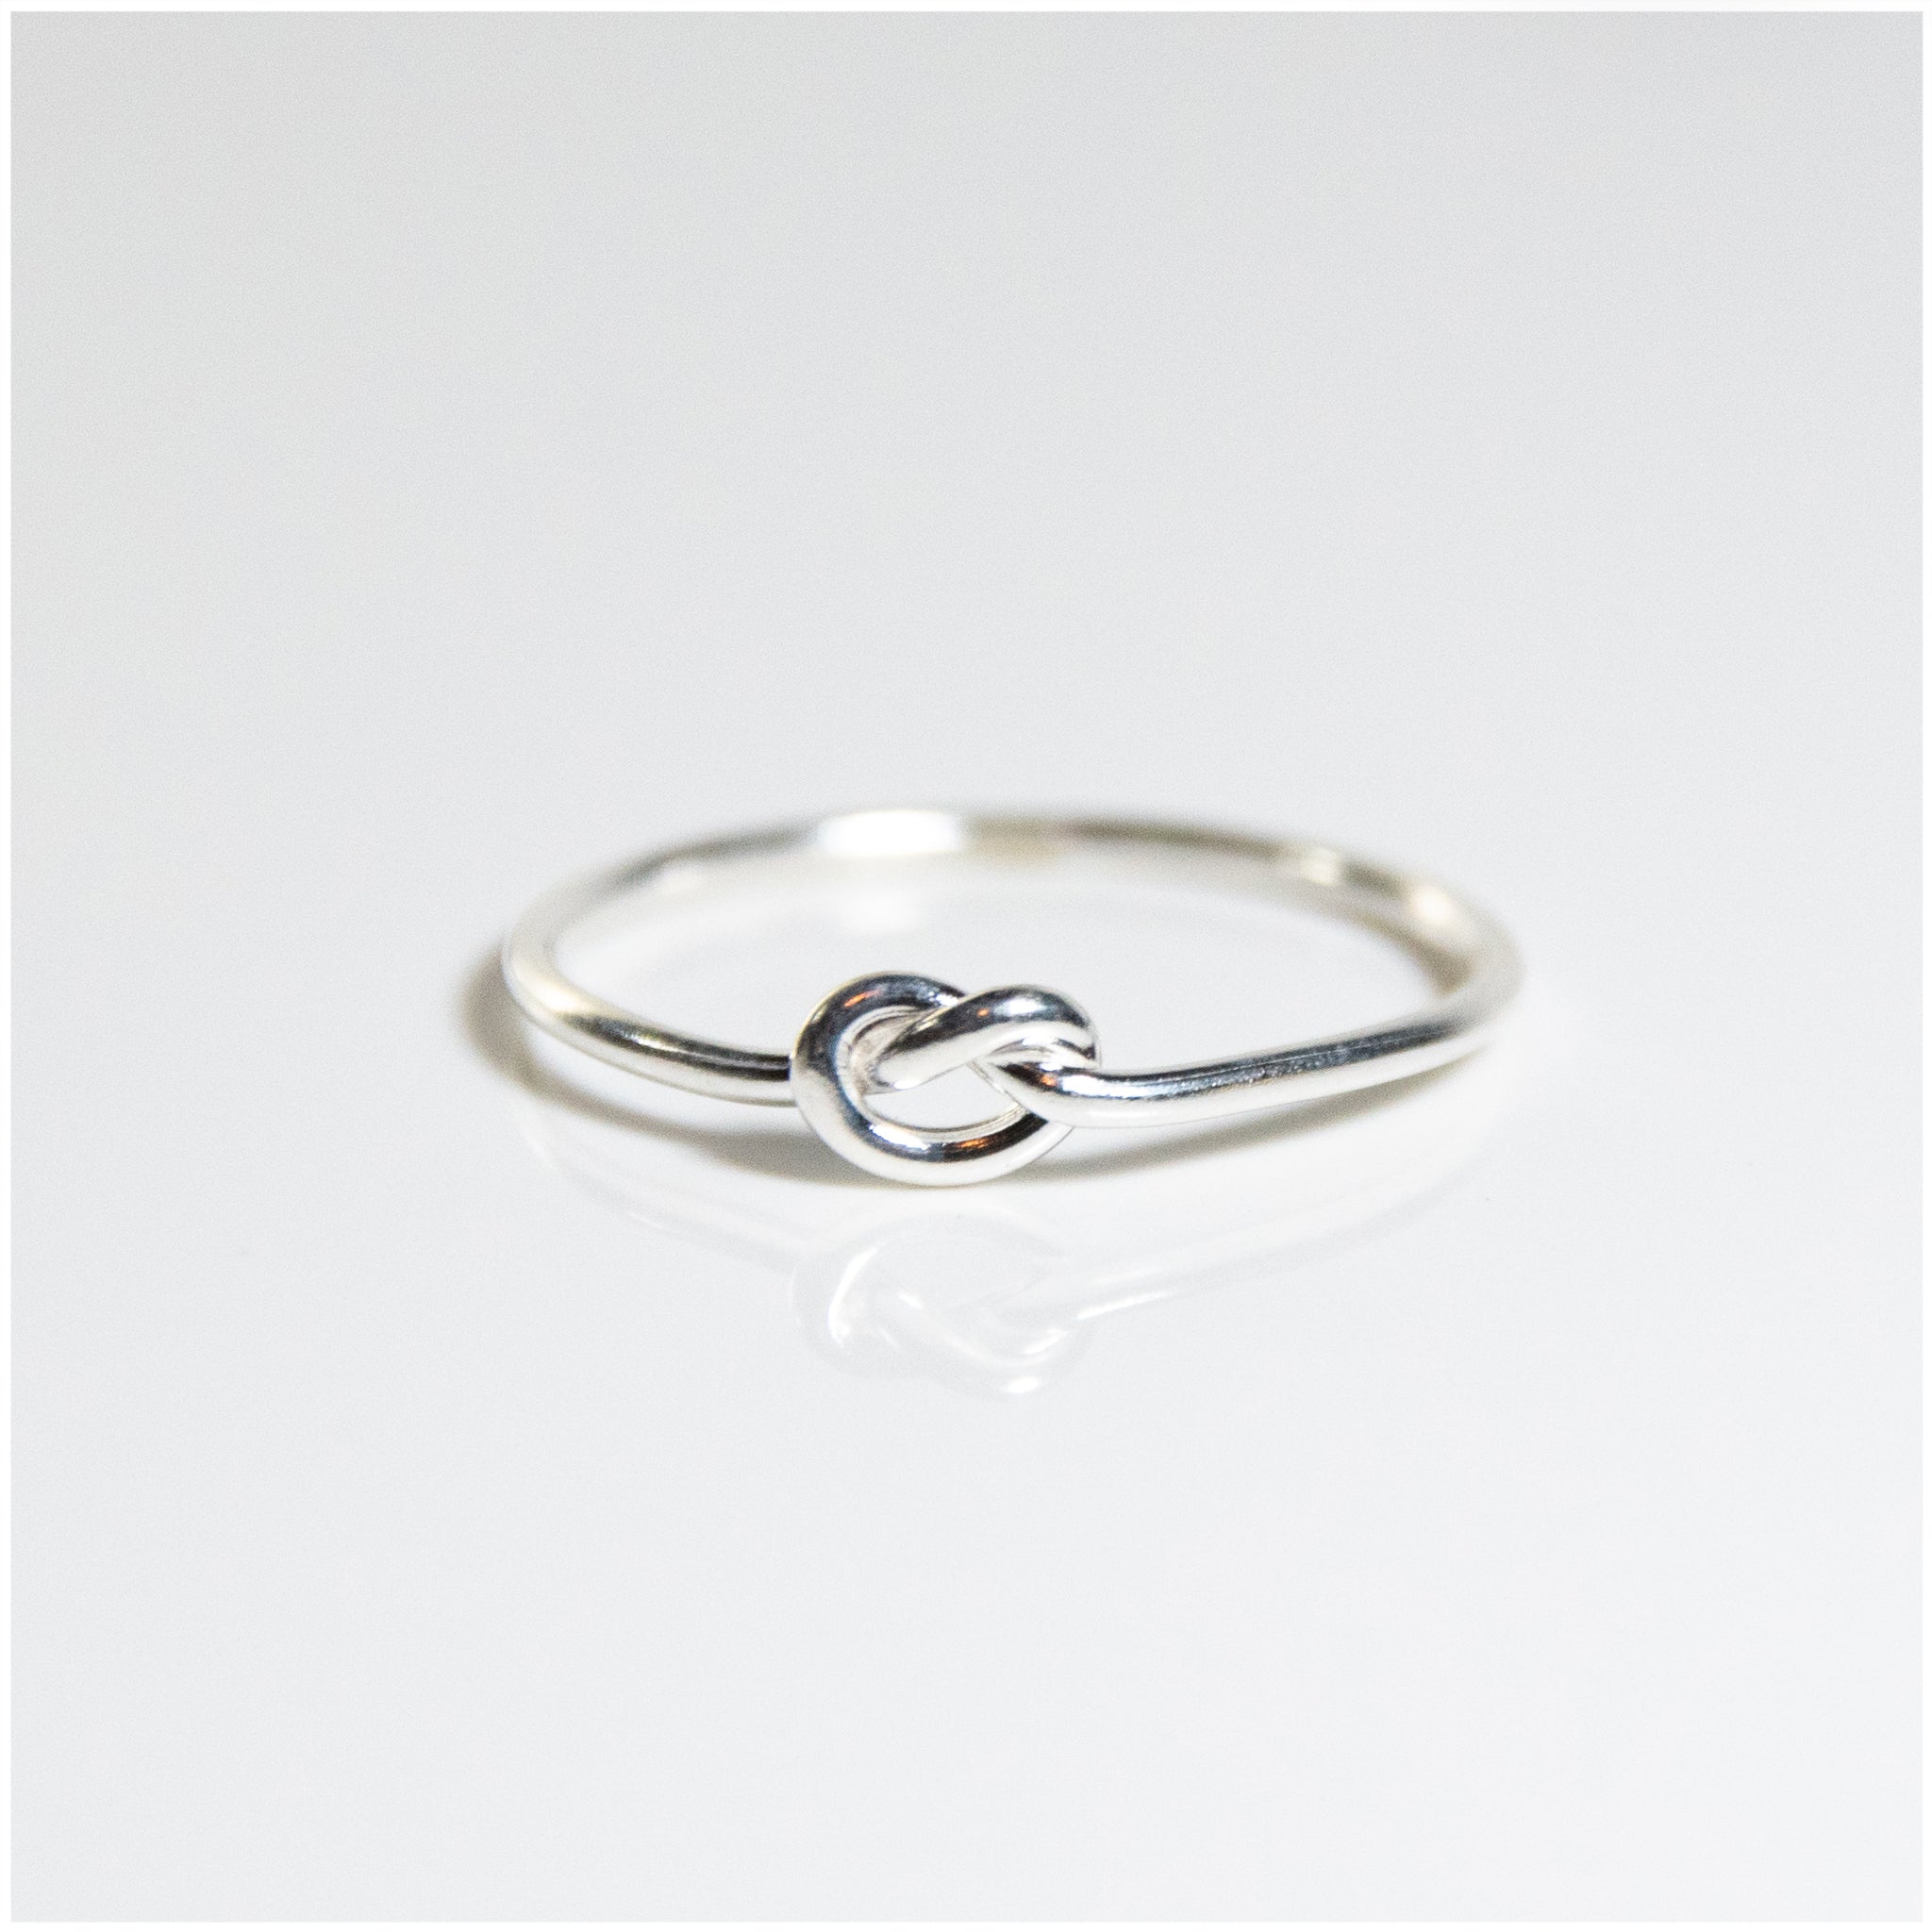 R050 - Sterling Silver Ring with Knot